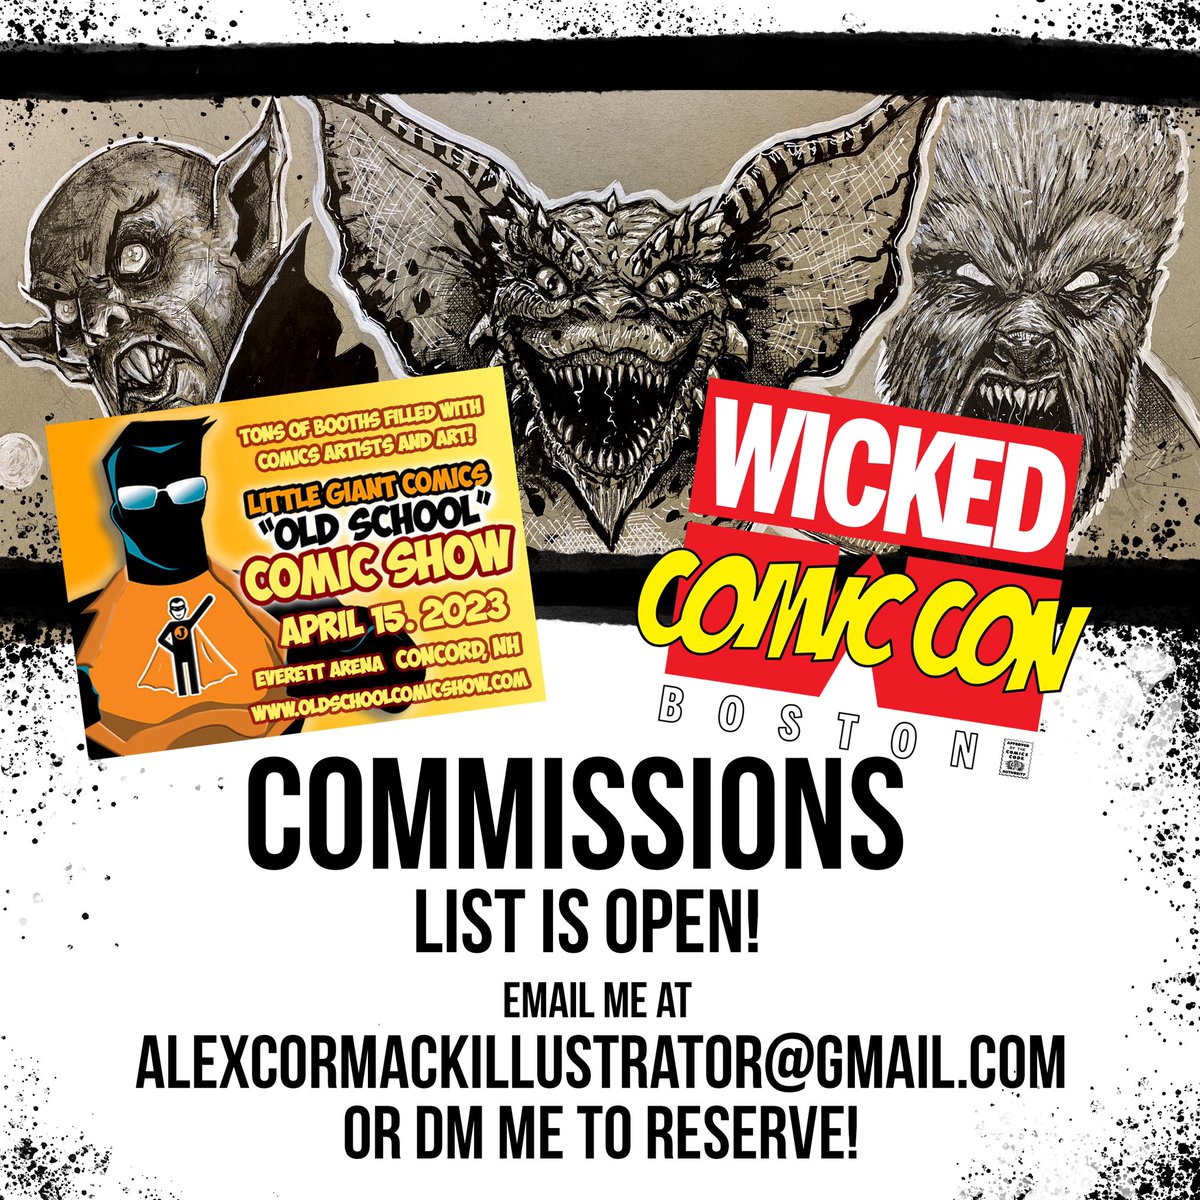 Hey everybody! Two of the best shows in New England are coming up and I’ll be at both! 
Spots for commissions are limited so if you’d like something let me know asap! 

@wickedcomiccon @littlegiantcomics